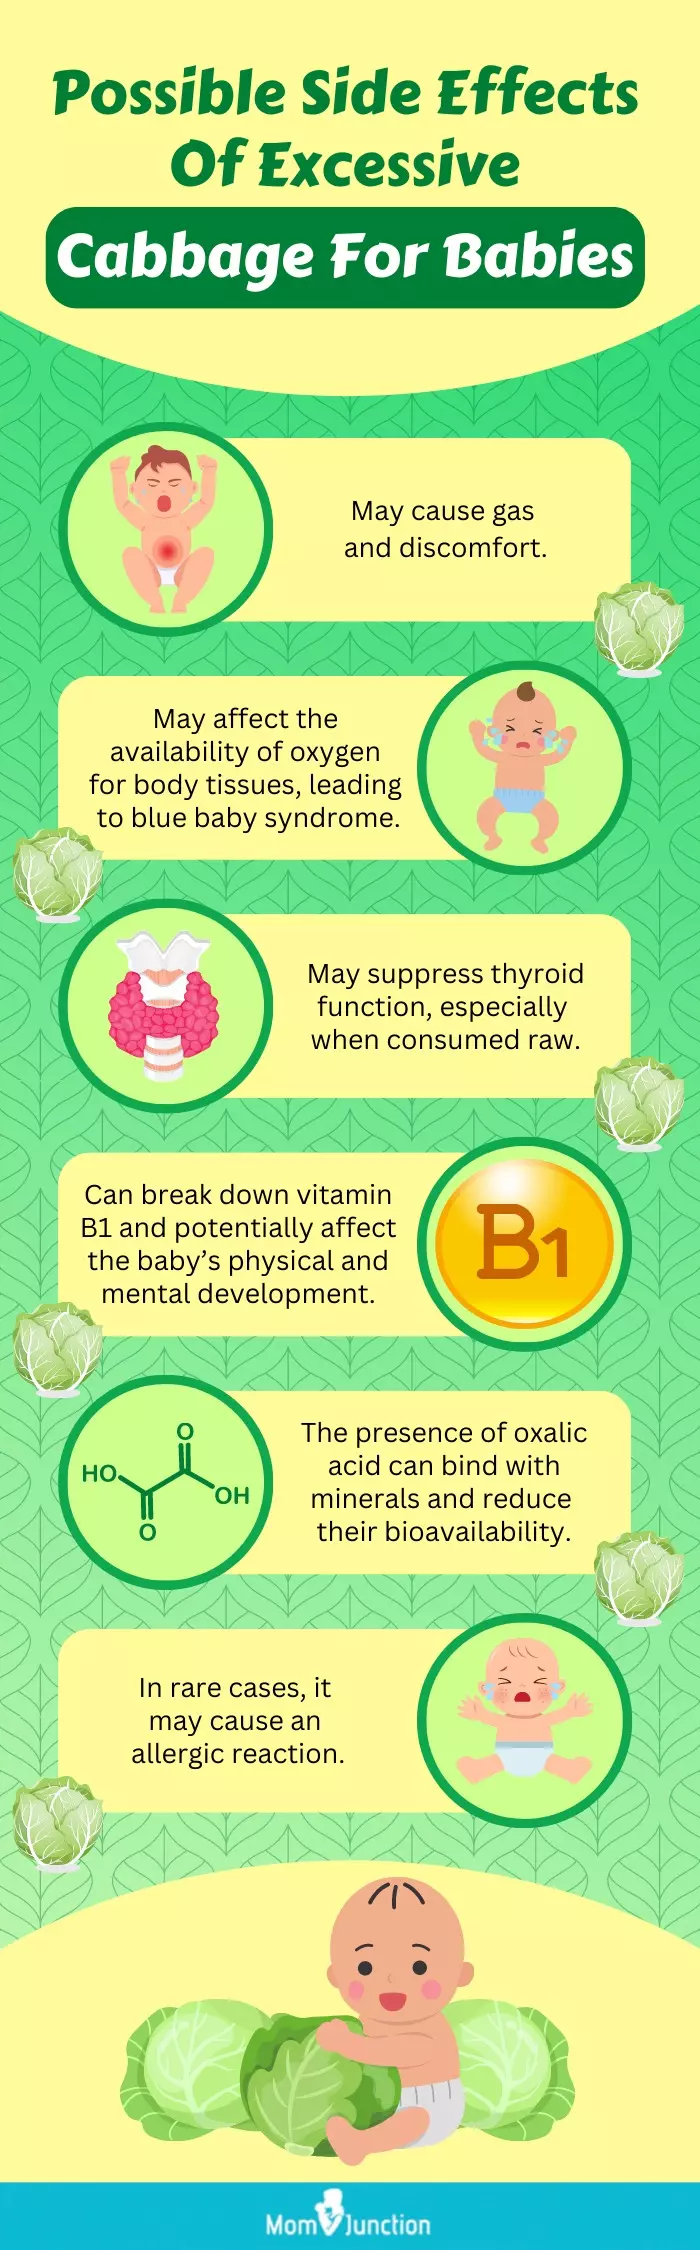 side effects of giving excessive cabbage to babies (infographic)